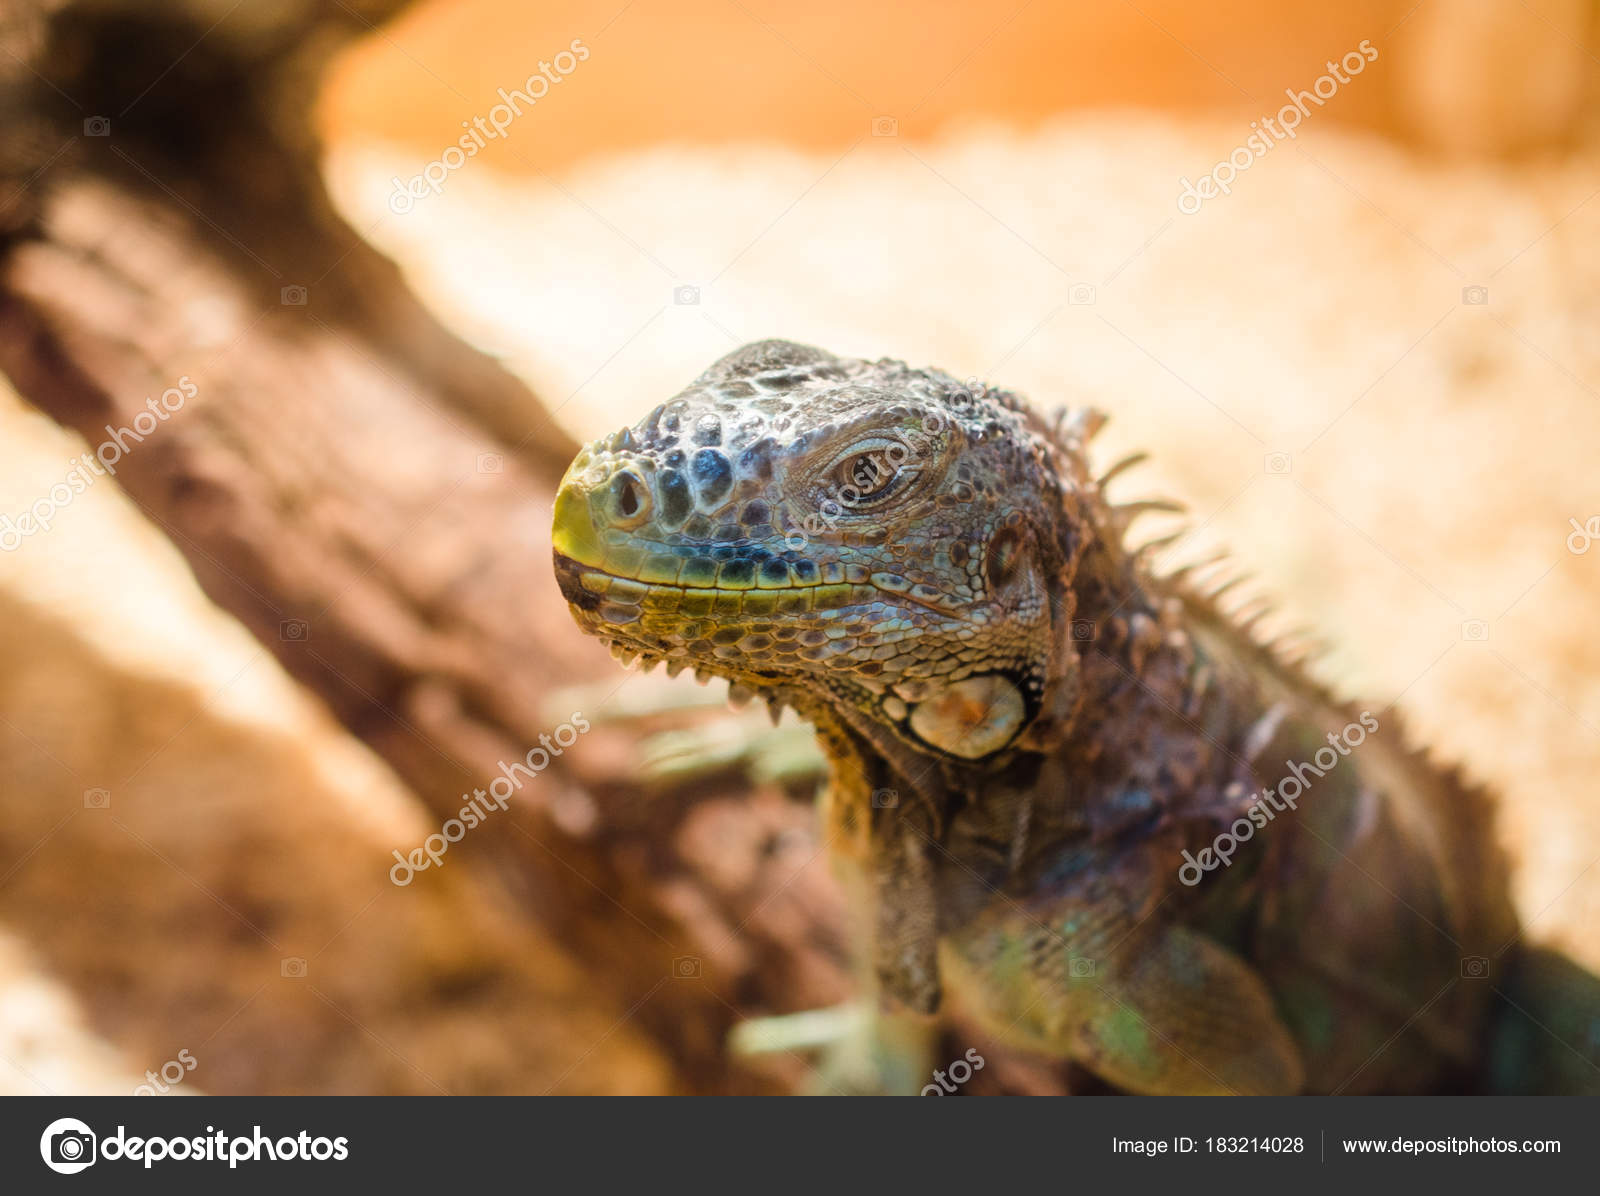 Big Lizard Green Iguana Sitting Motionless In A Cage In A Pet Stock Photo C Borislav1987 183214028,Red Slider Turtle Poop